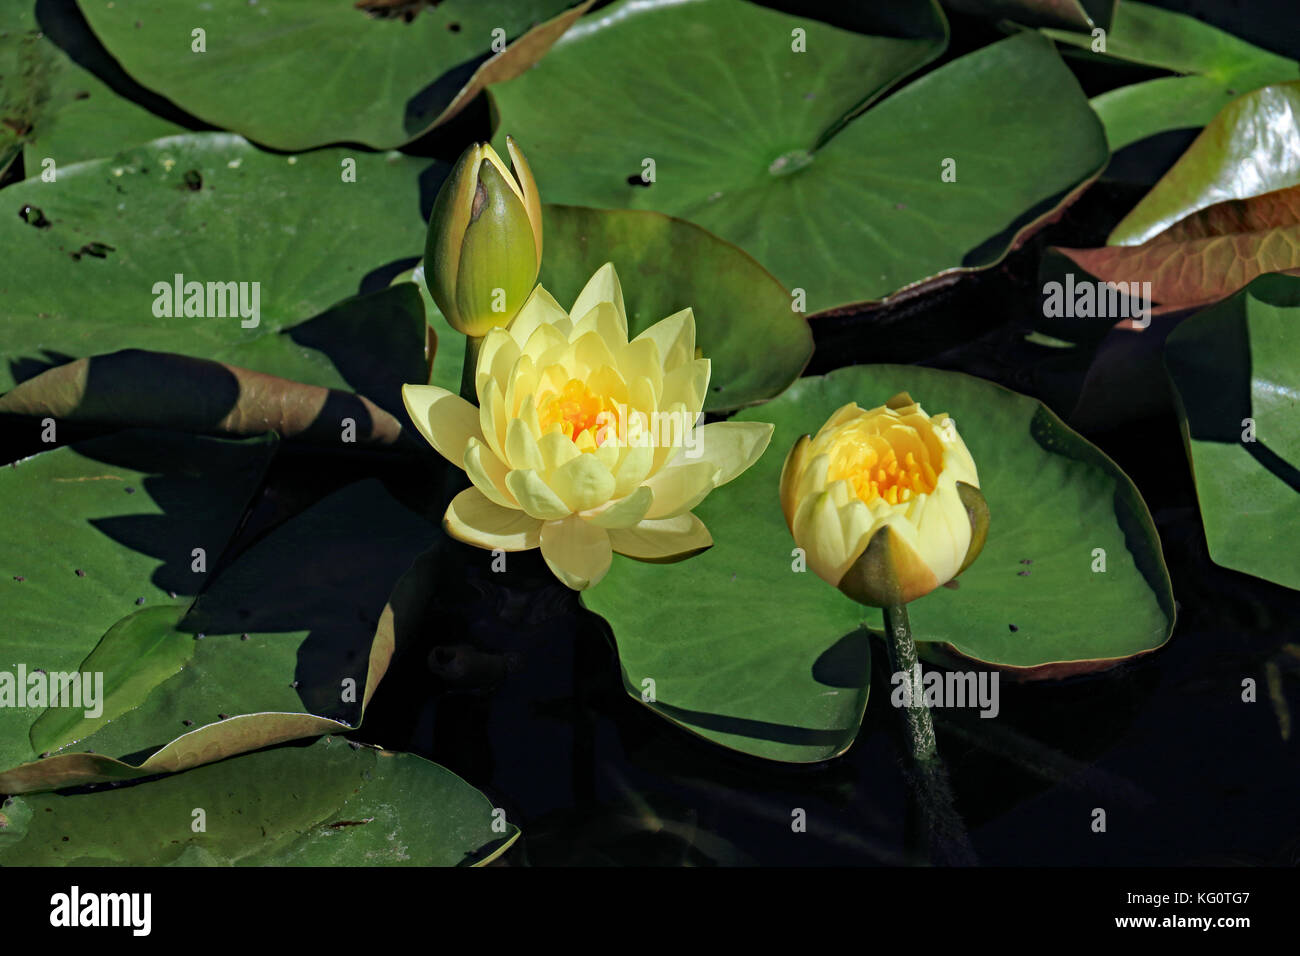 Here are 3 stages of this beautiful and bright water lily specimen: closed bud, slightly open blossom and fully open lily blossom. Stock Photo